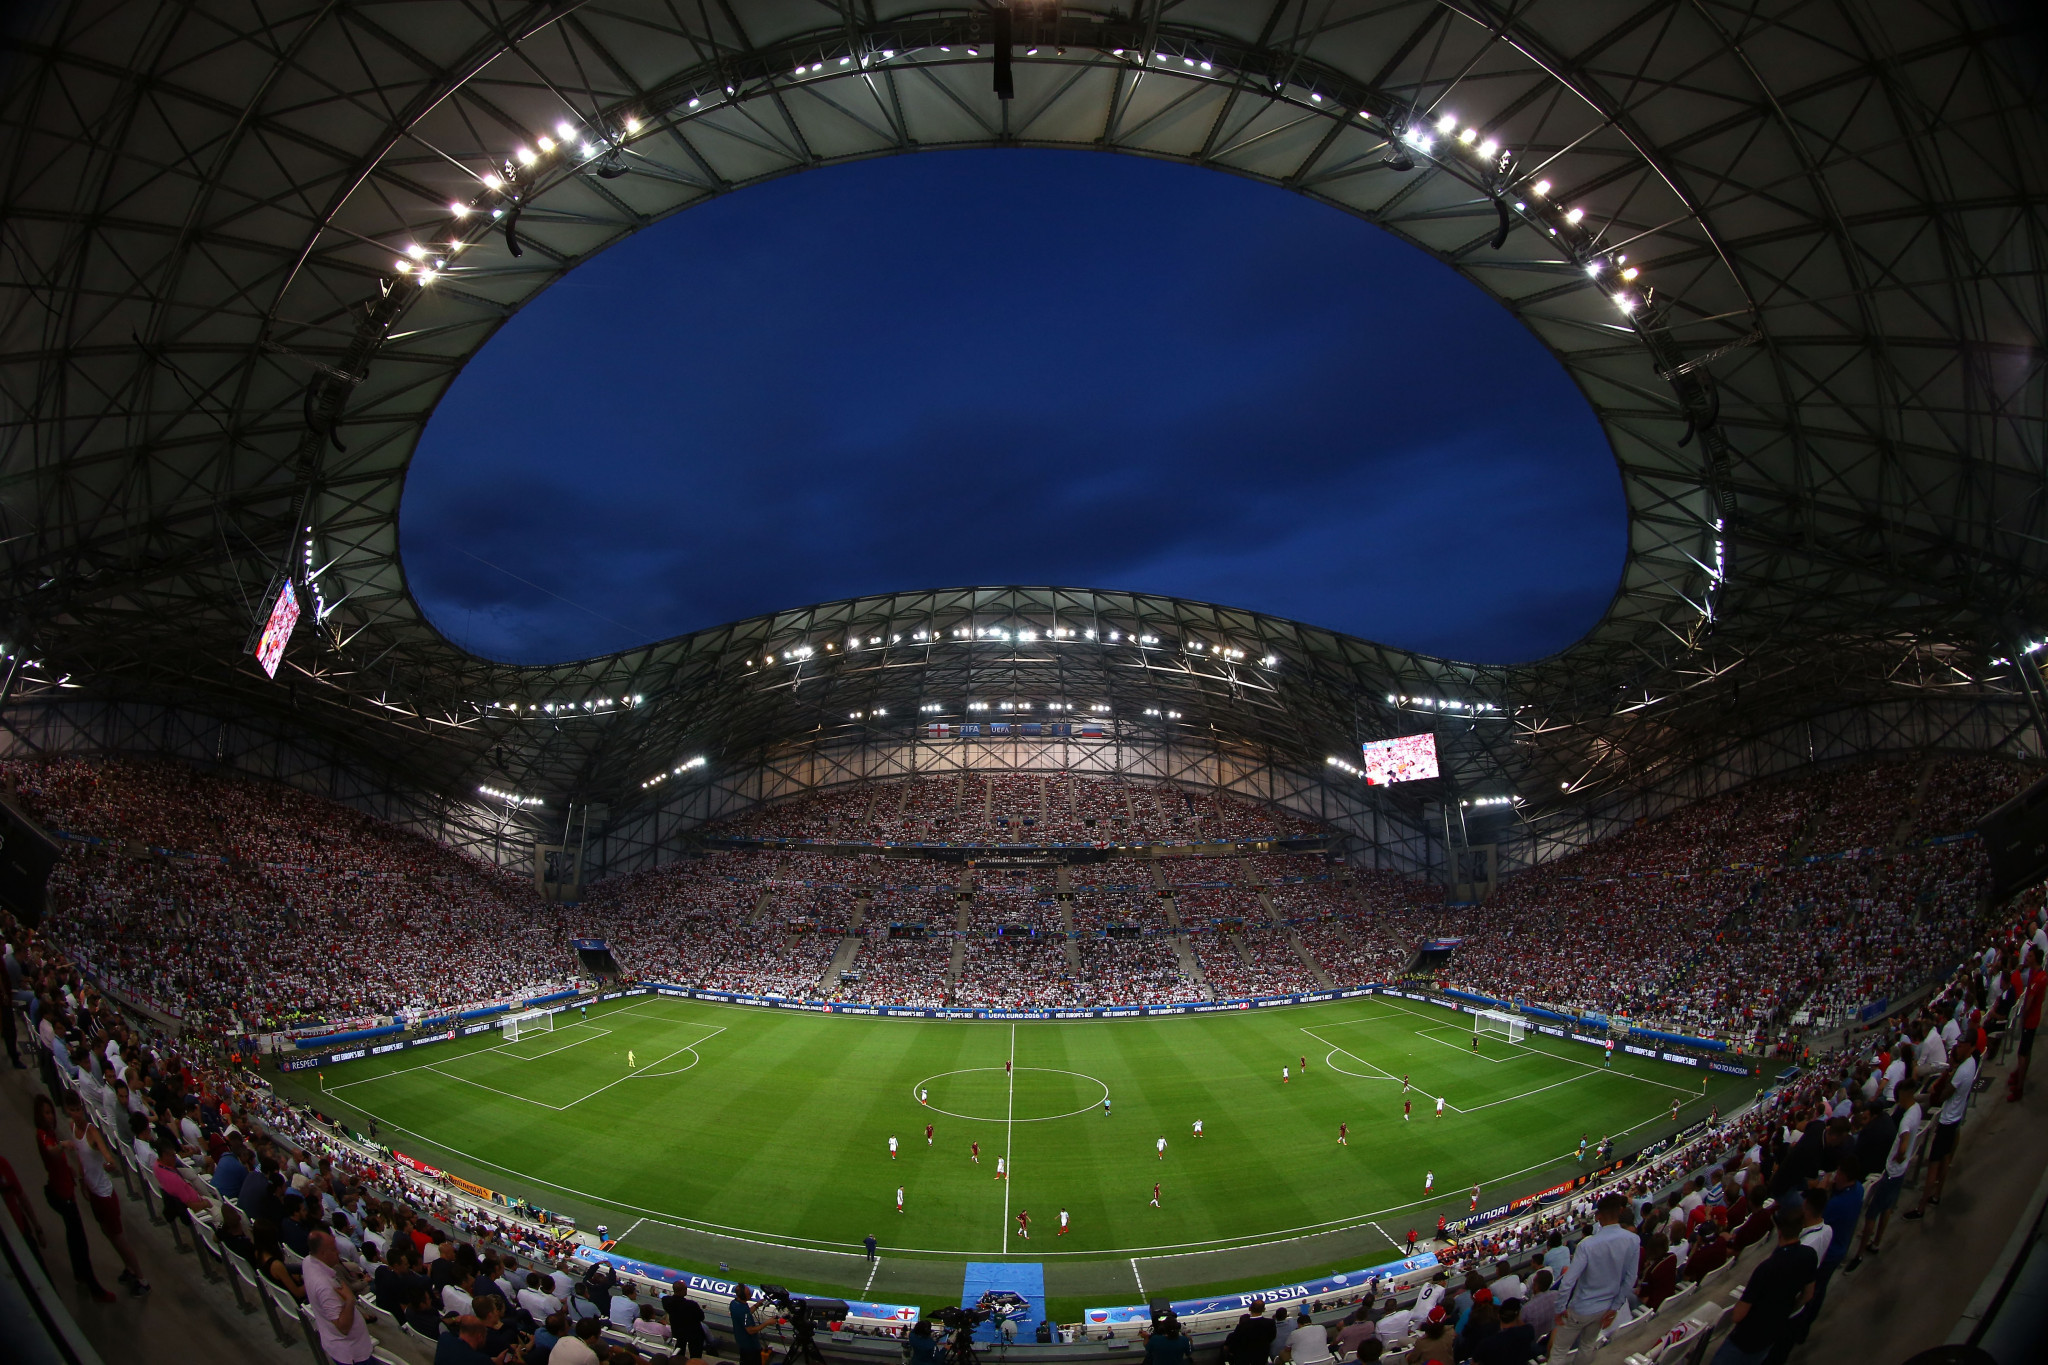 The Stade Vélodrome in Marseille has been awarded the 2023-2024 Top 14 Final in place of the Stade de France ©Getty Images